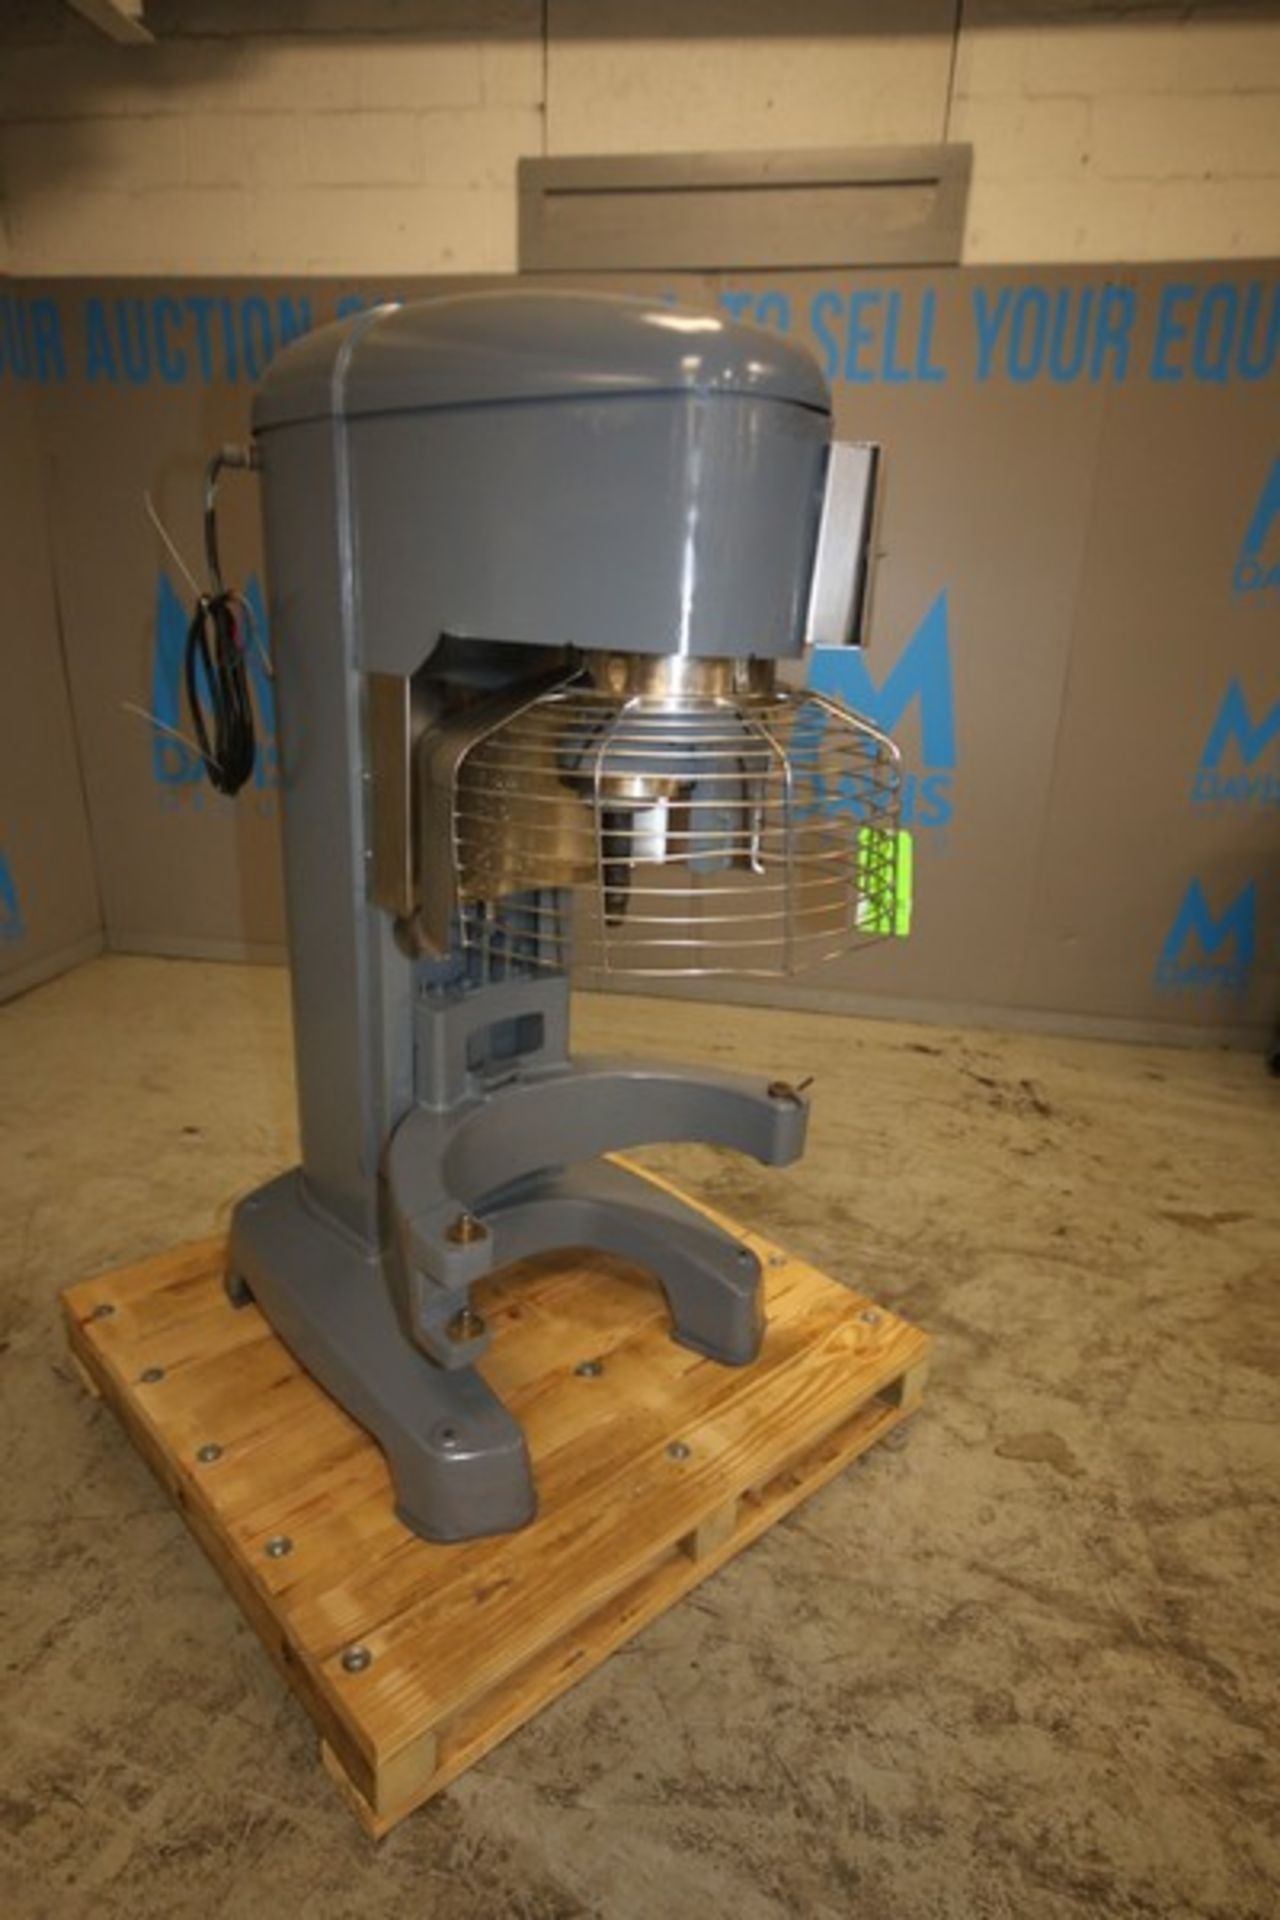 Hobart Vertical Mixer, Model H1400, SN 31-13-80-561, 200-240 3 Phase, with Digital Controls (INV#